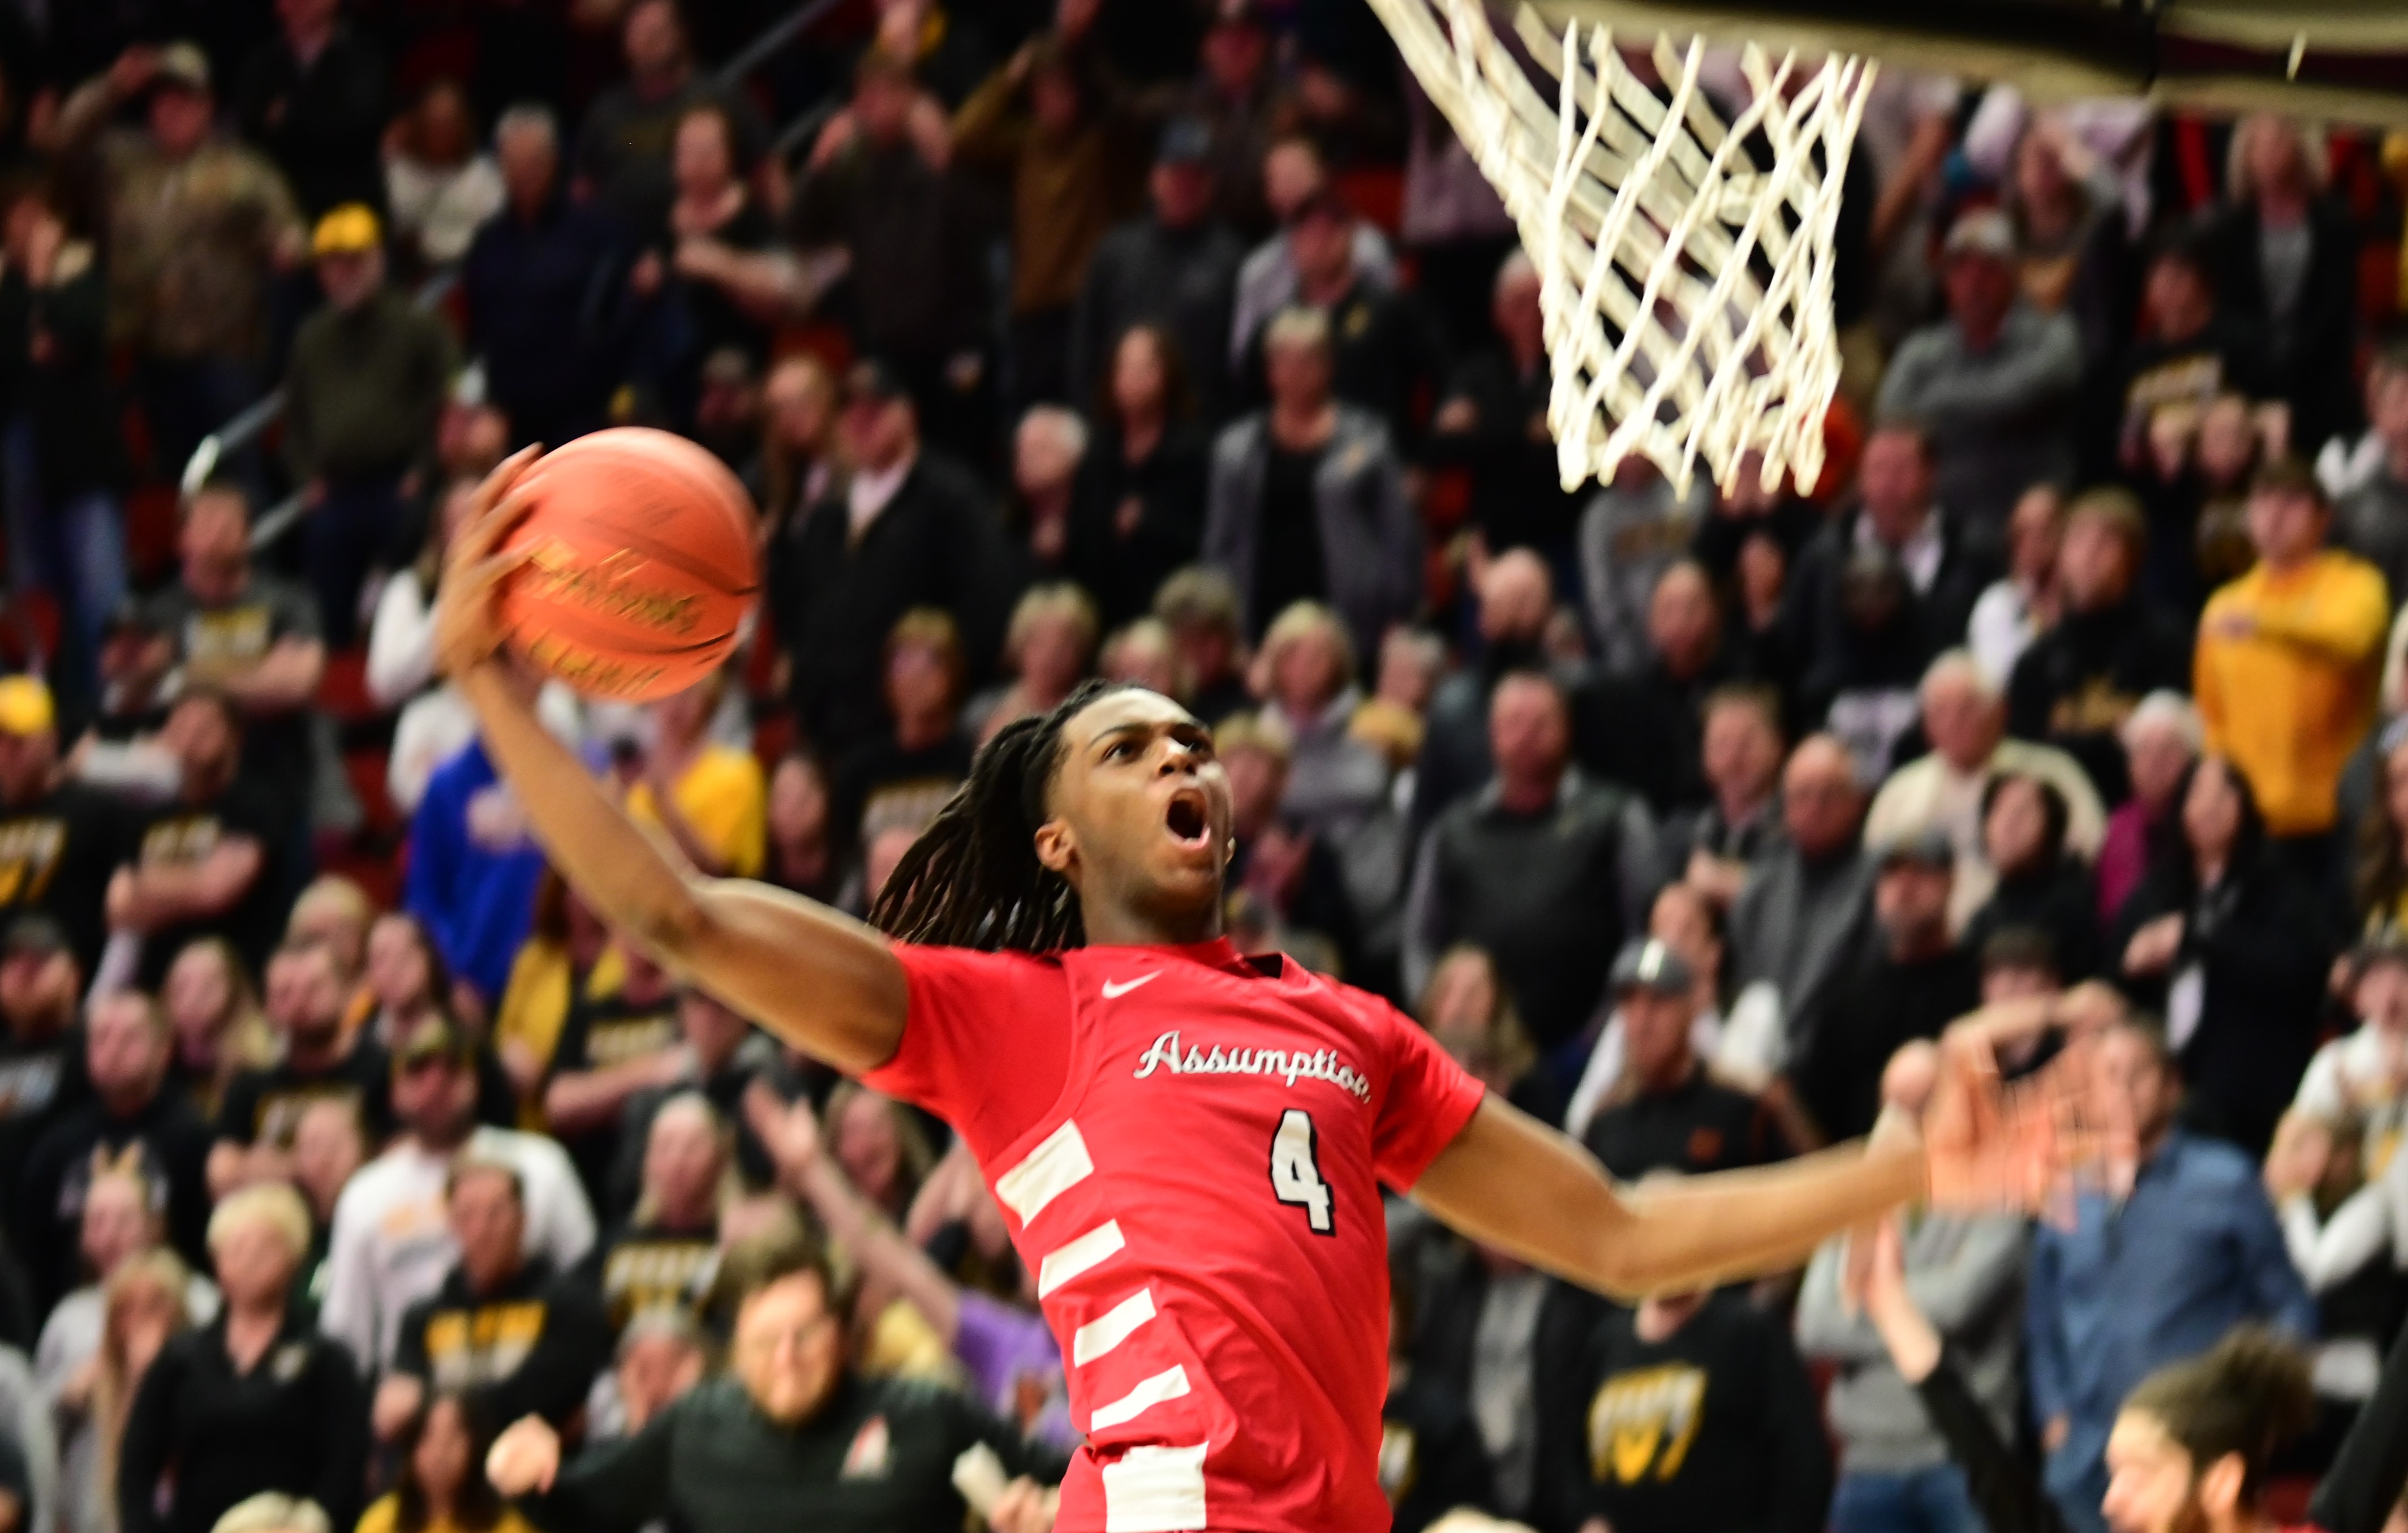 Davenport Assumption's Navon Shabazz goes up for a dunk during the Class 3A state championship game against Waverly-Shell Rock on Friday at Wells Fargo Arena in Des Moines. (Photo by Ryan Timmerman)